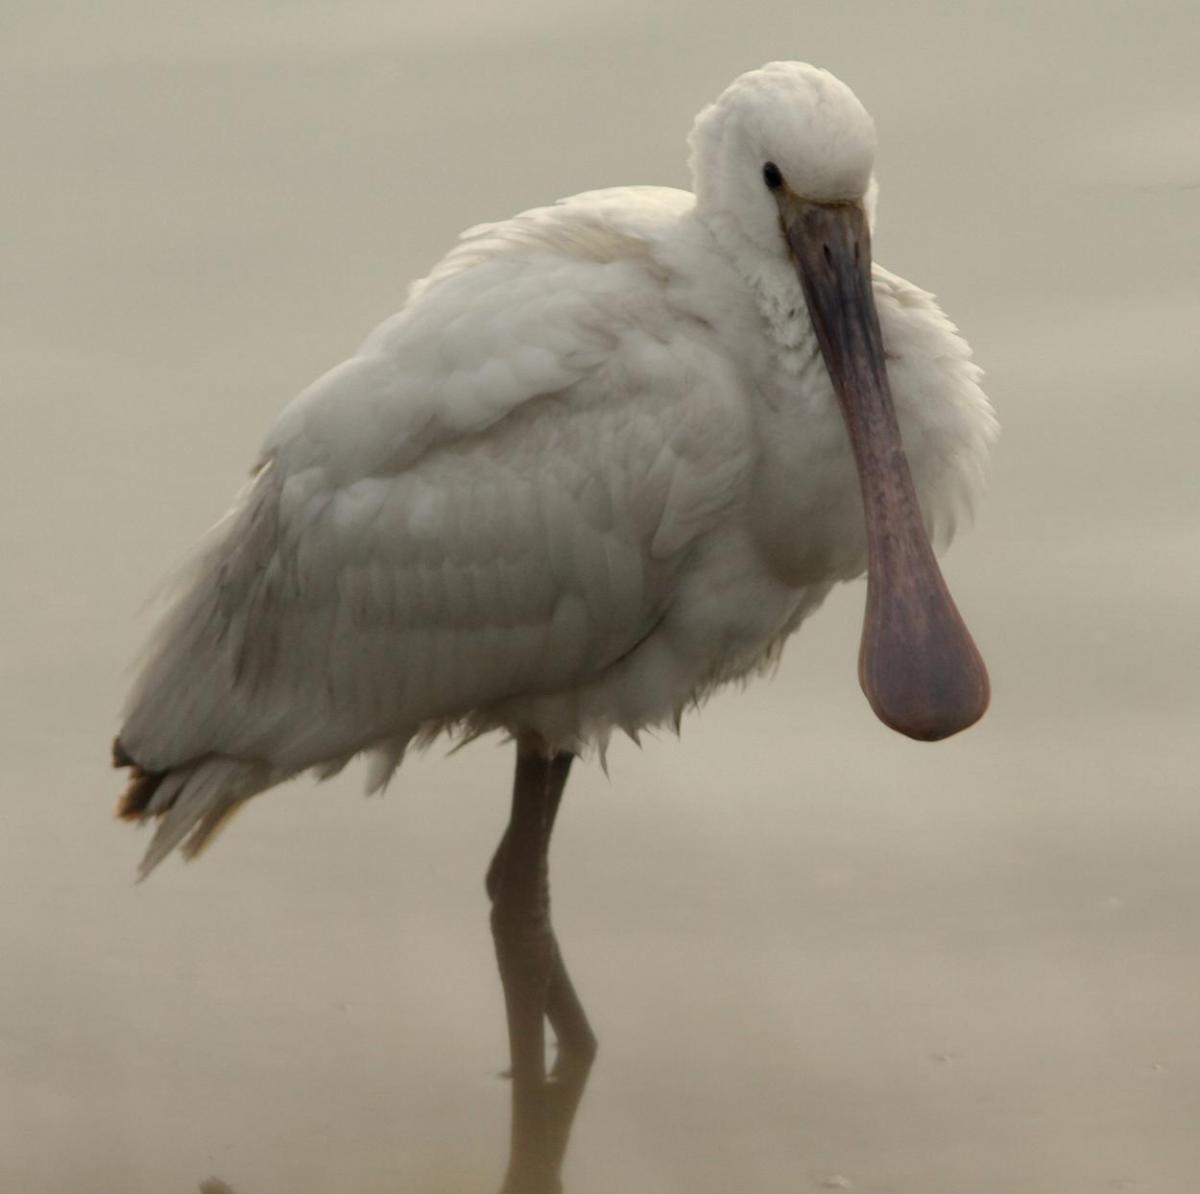 Nick Mudge took this image of a Spoonbill at Poole Harbour